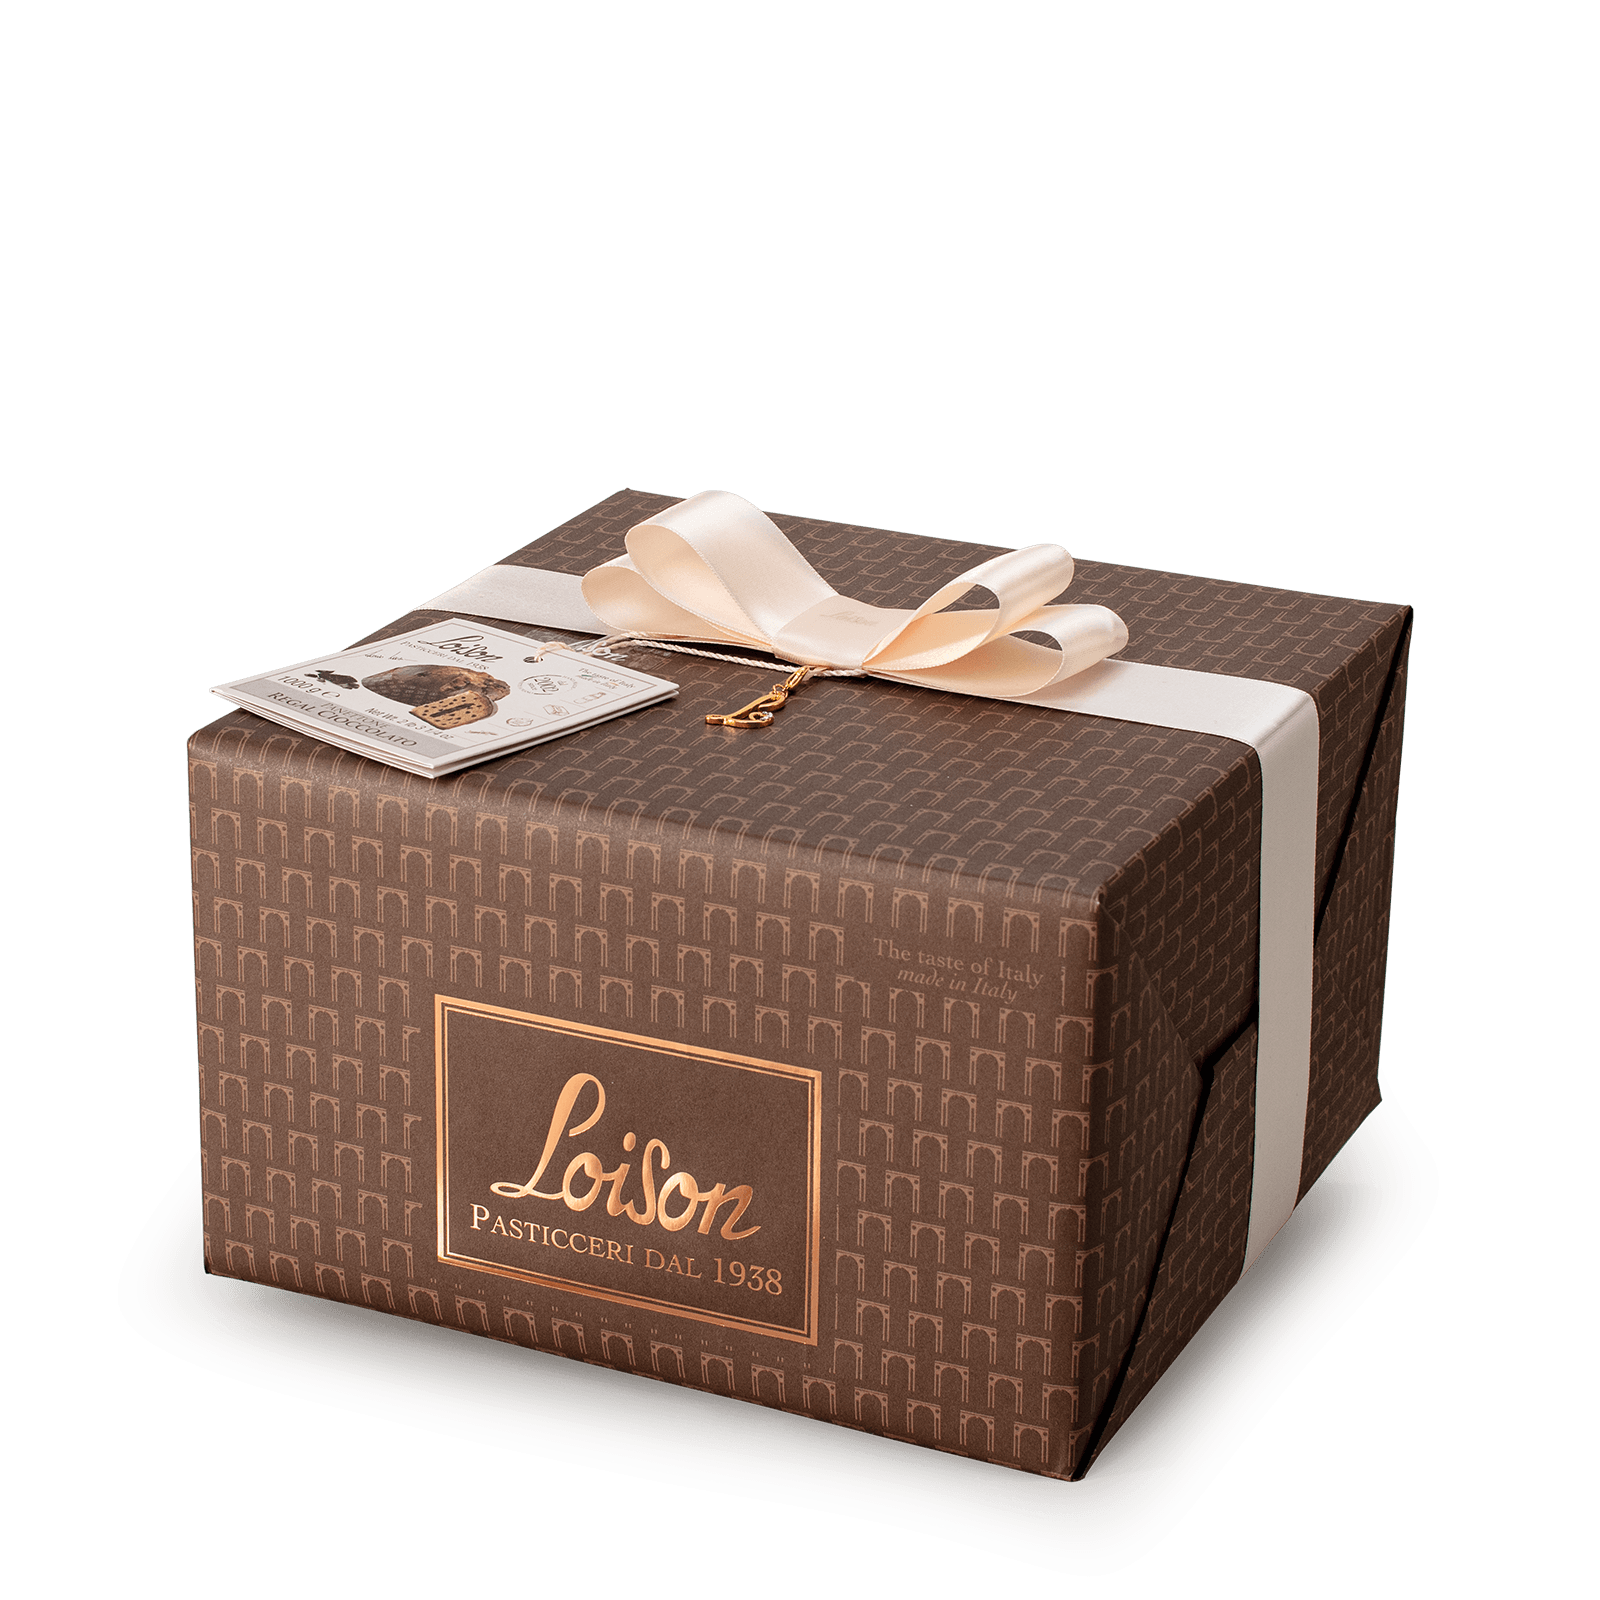 Linea Top GenesiPanettone with Chocolate cream and chips - Genesi Loison